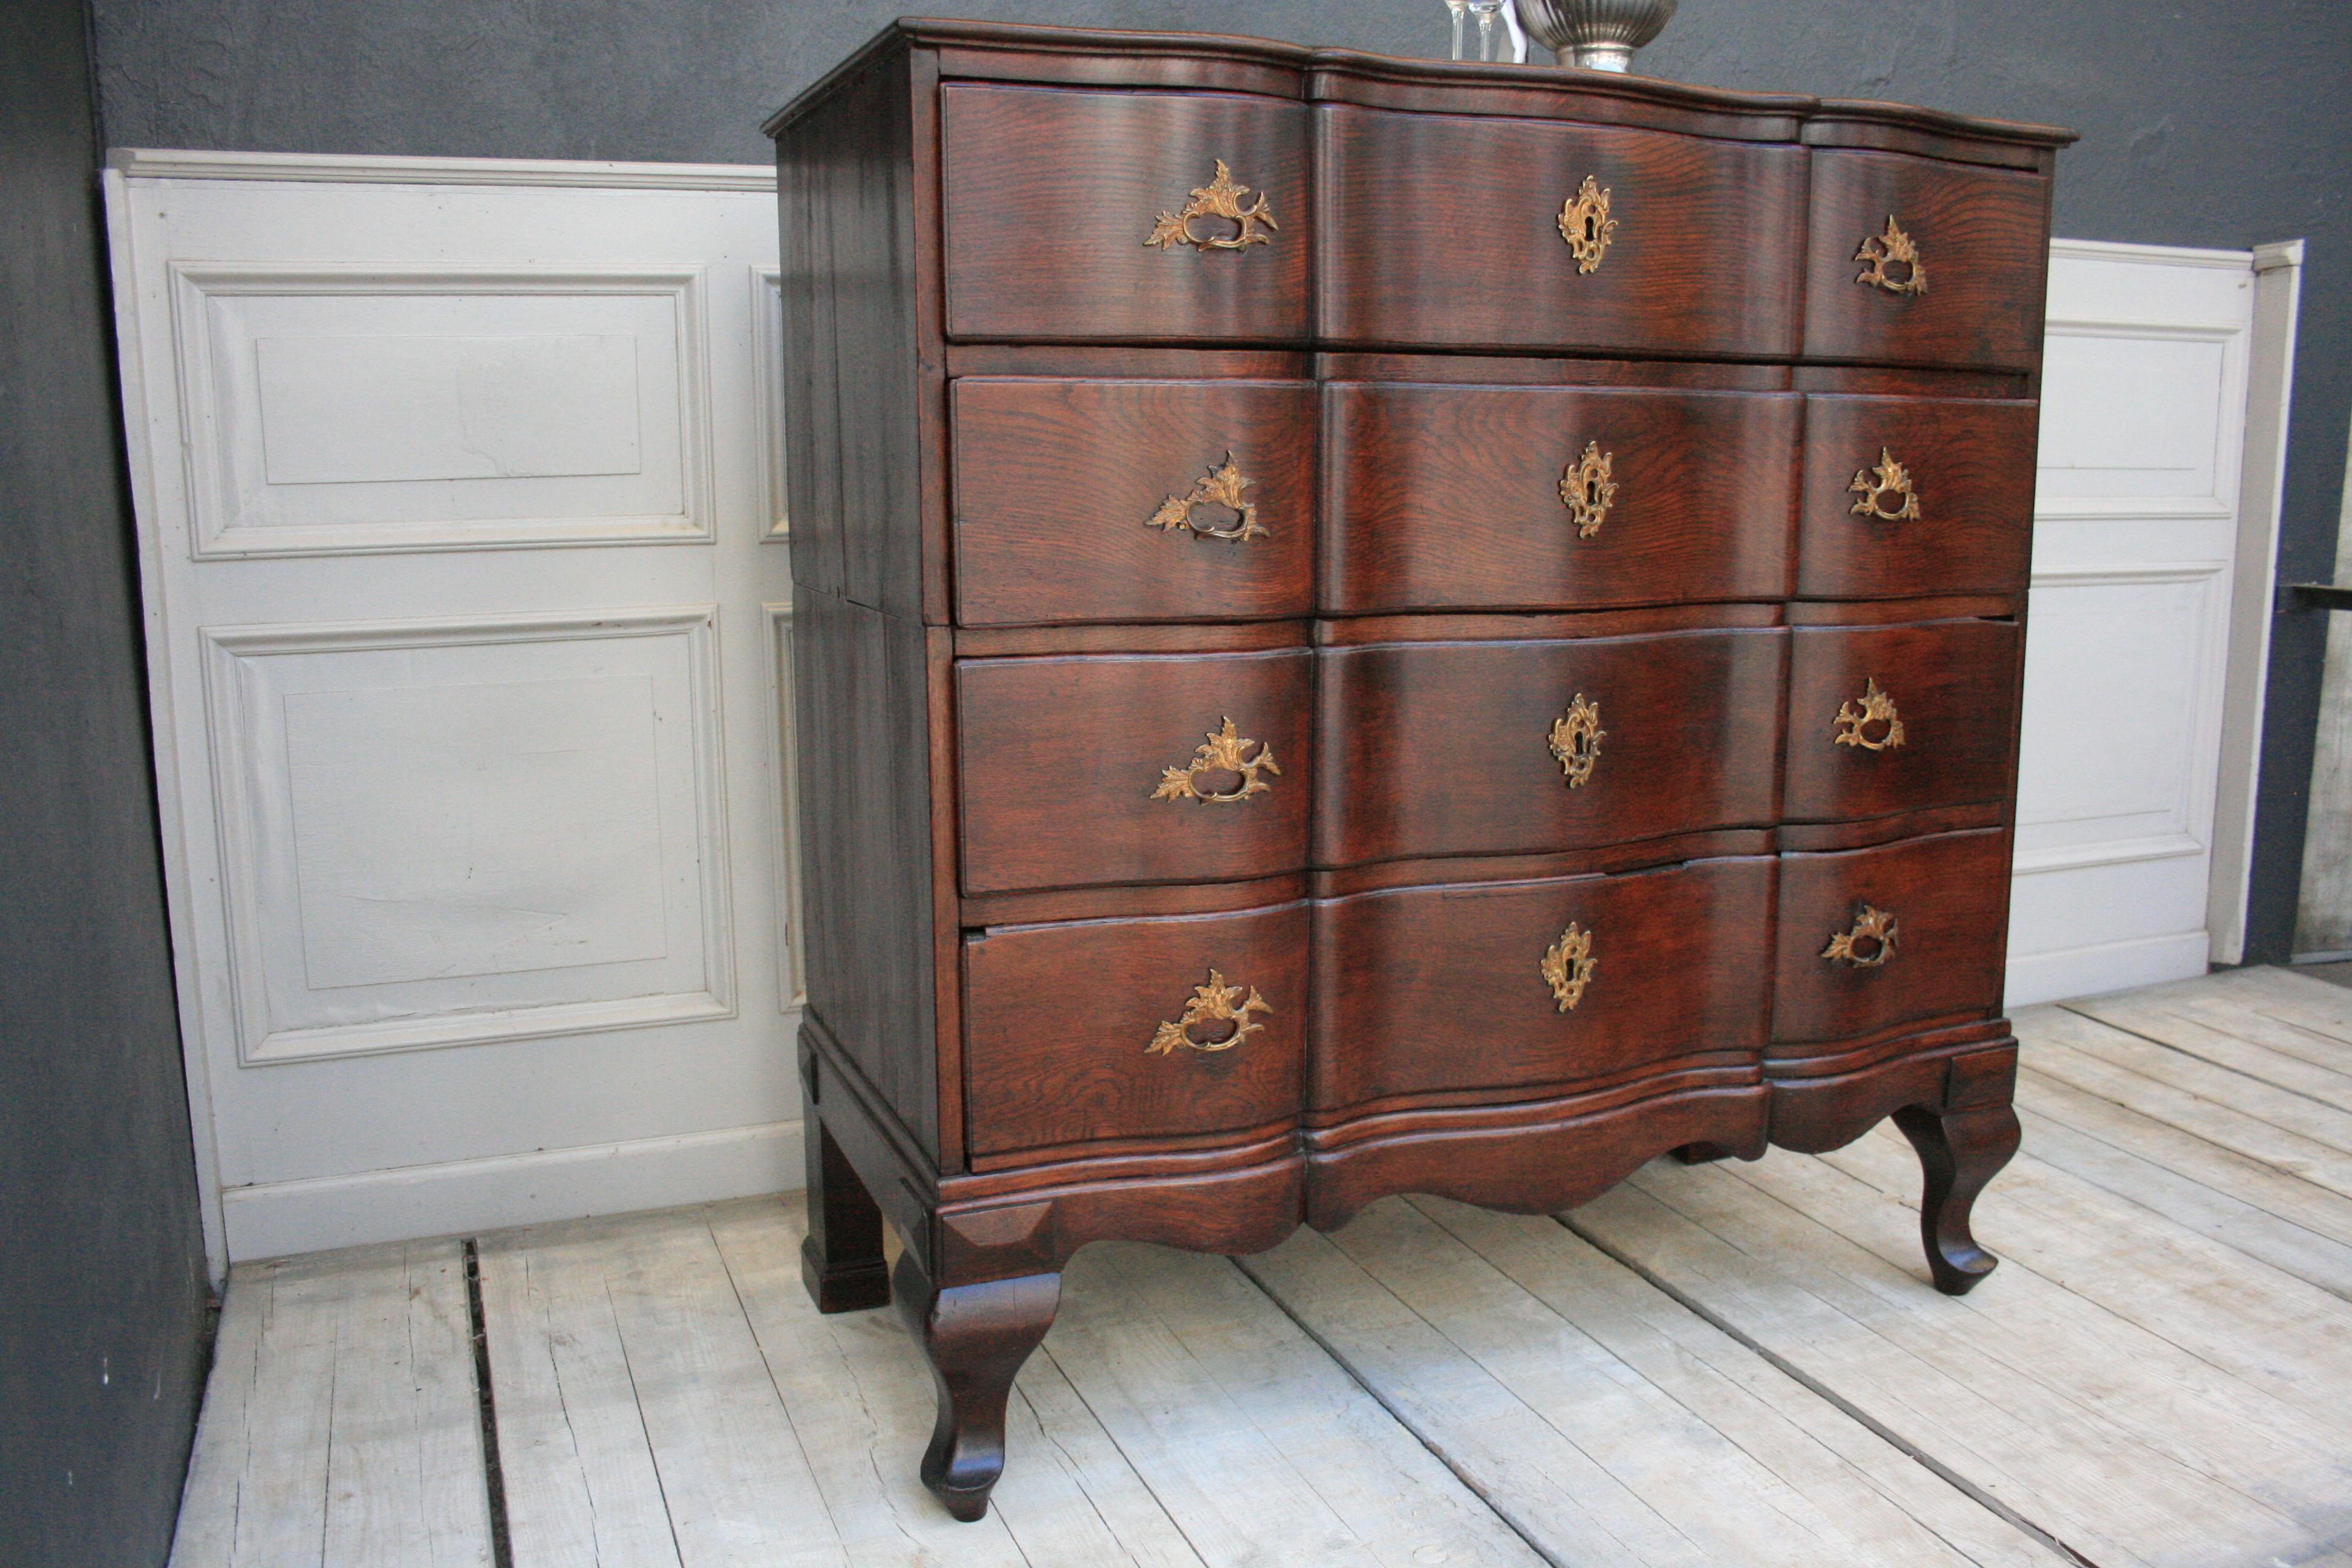 Original old baroque high chest of solid oak, northern Germany, circa 1750. Old restored. Two-divided (upper and lower part).
S-shaped sideways legs; cut out pedestal with small apron; moving front with double folding; original handles and key